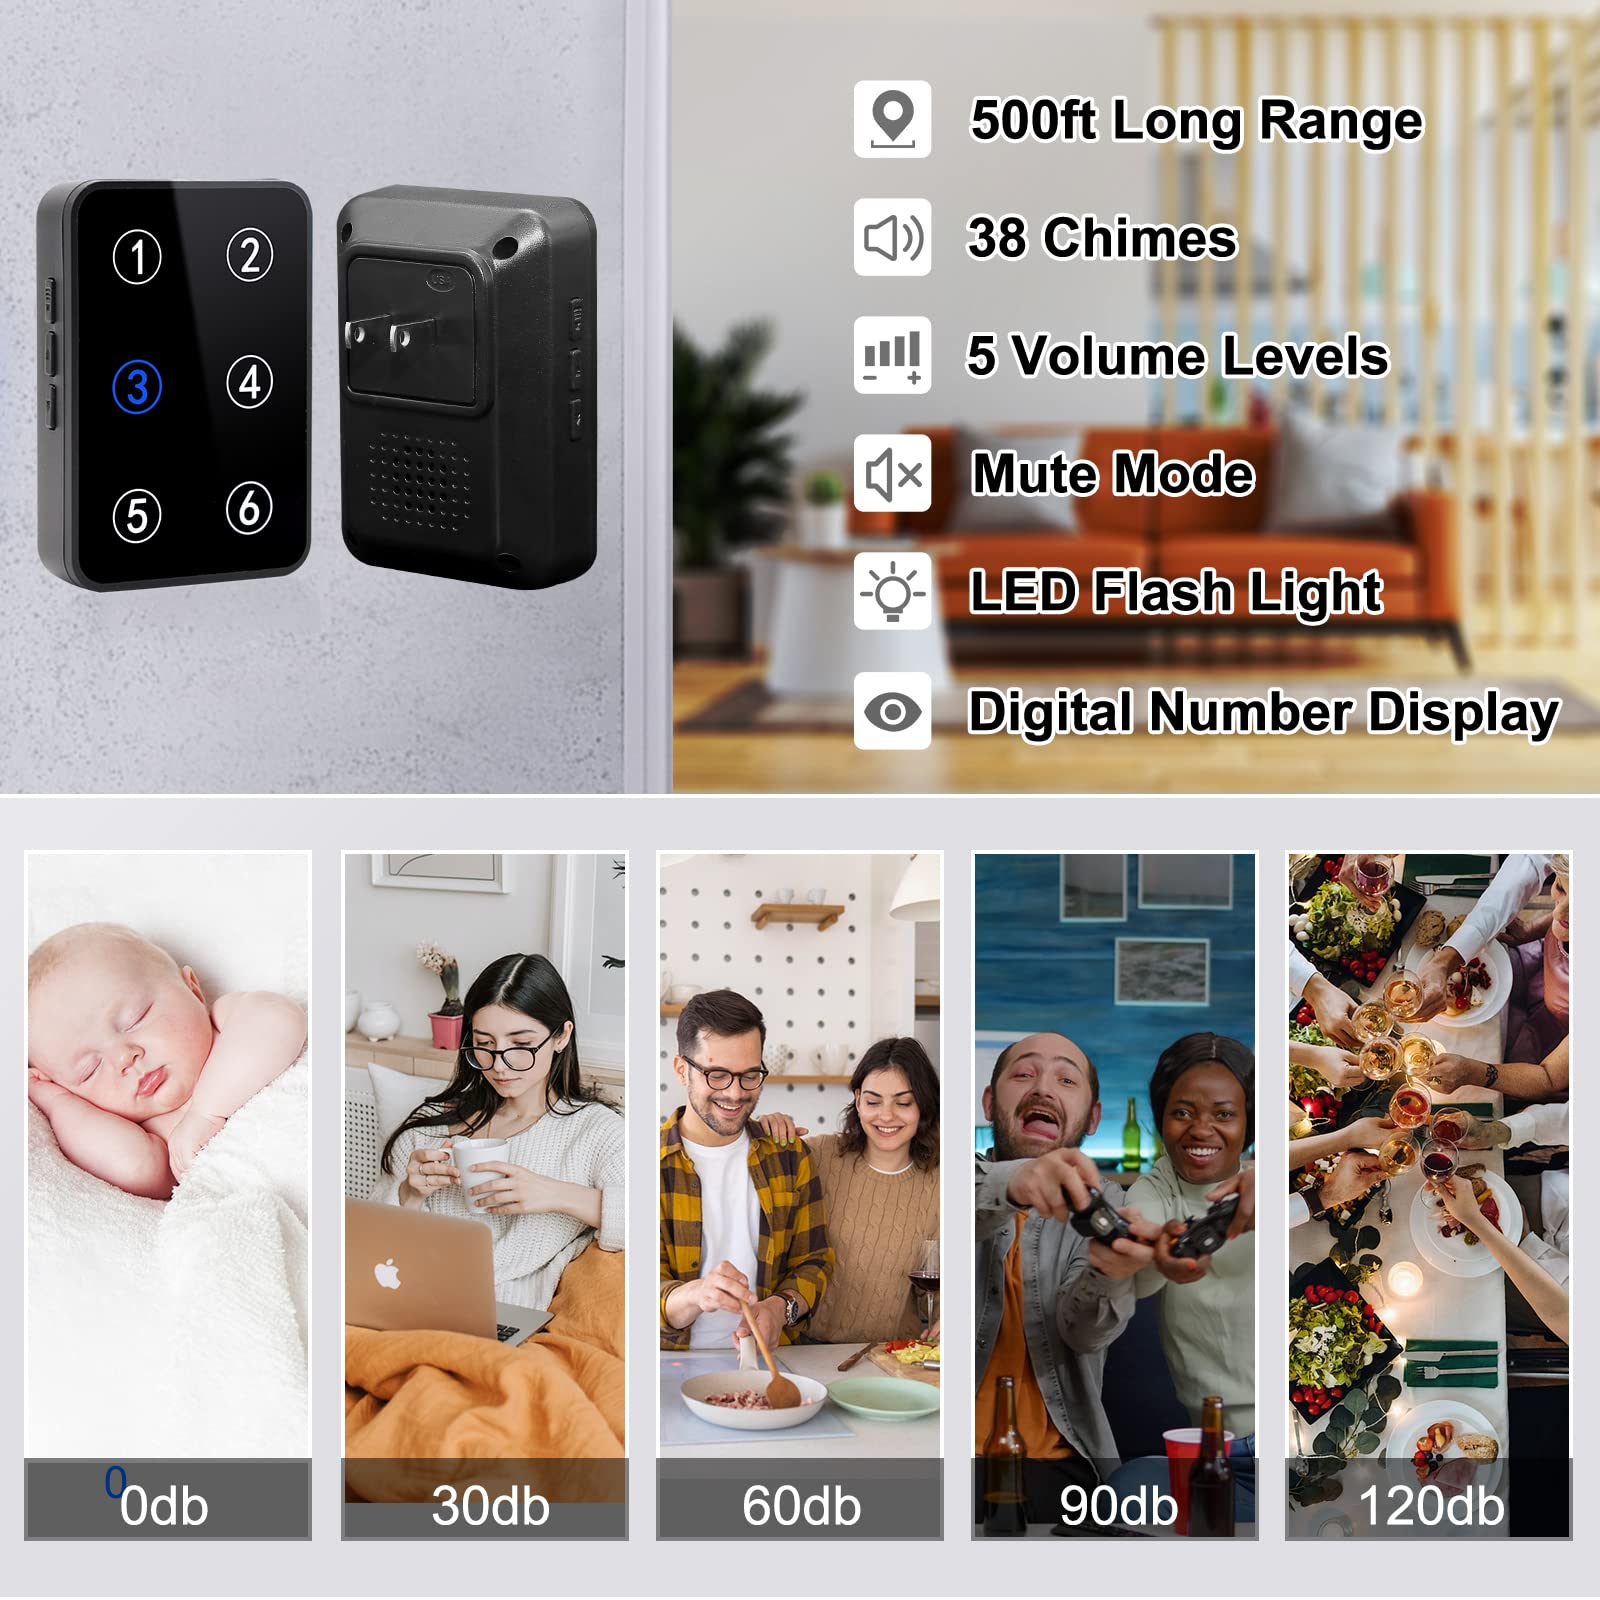 Daytech LED Number Display Caregiver Pager Wireless Call Button Nurse Call System 500Ft SOS Bell for Elderly